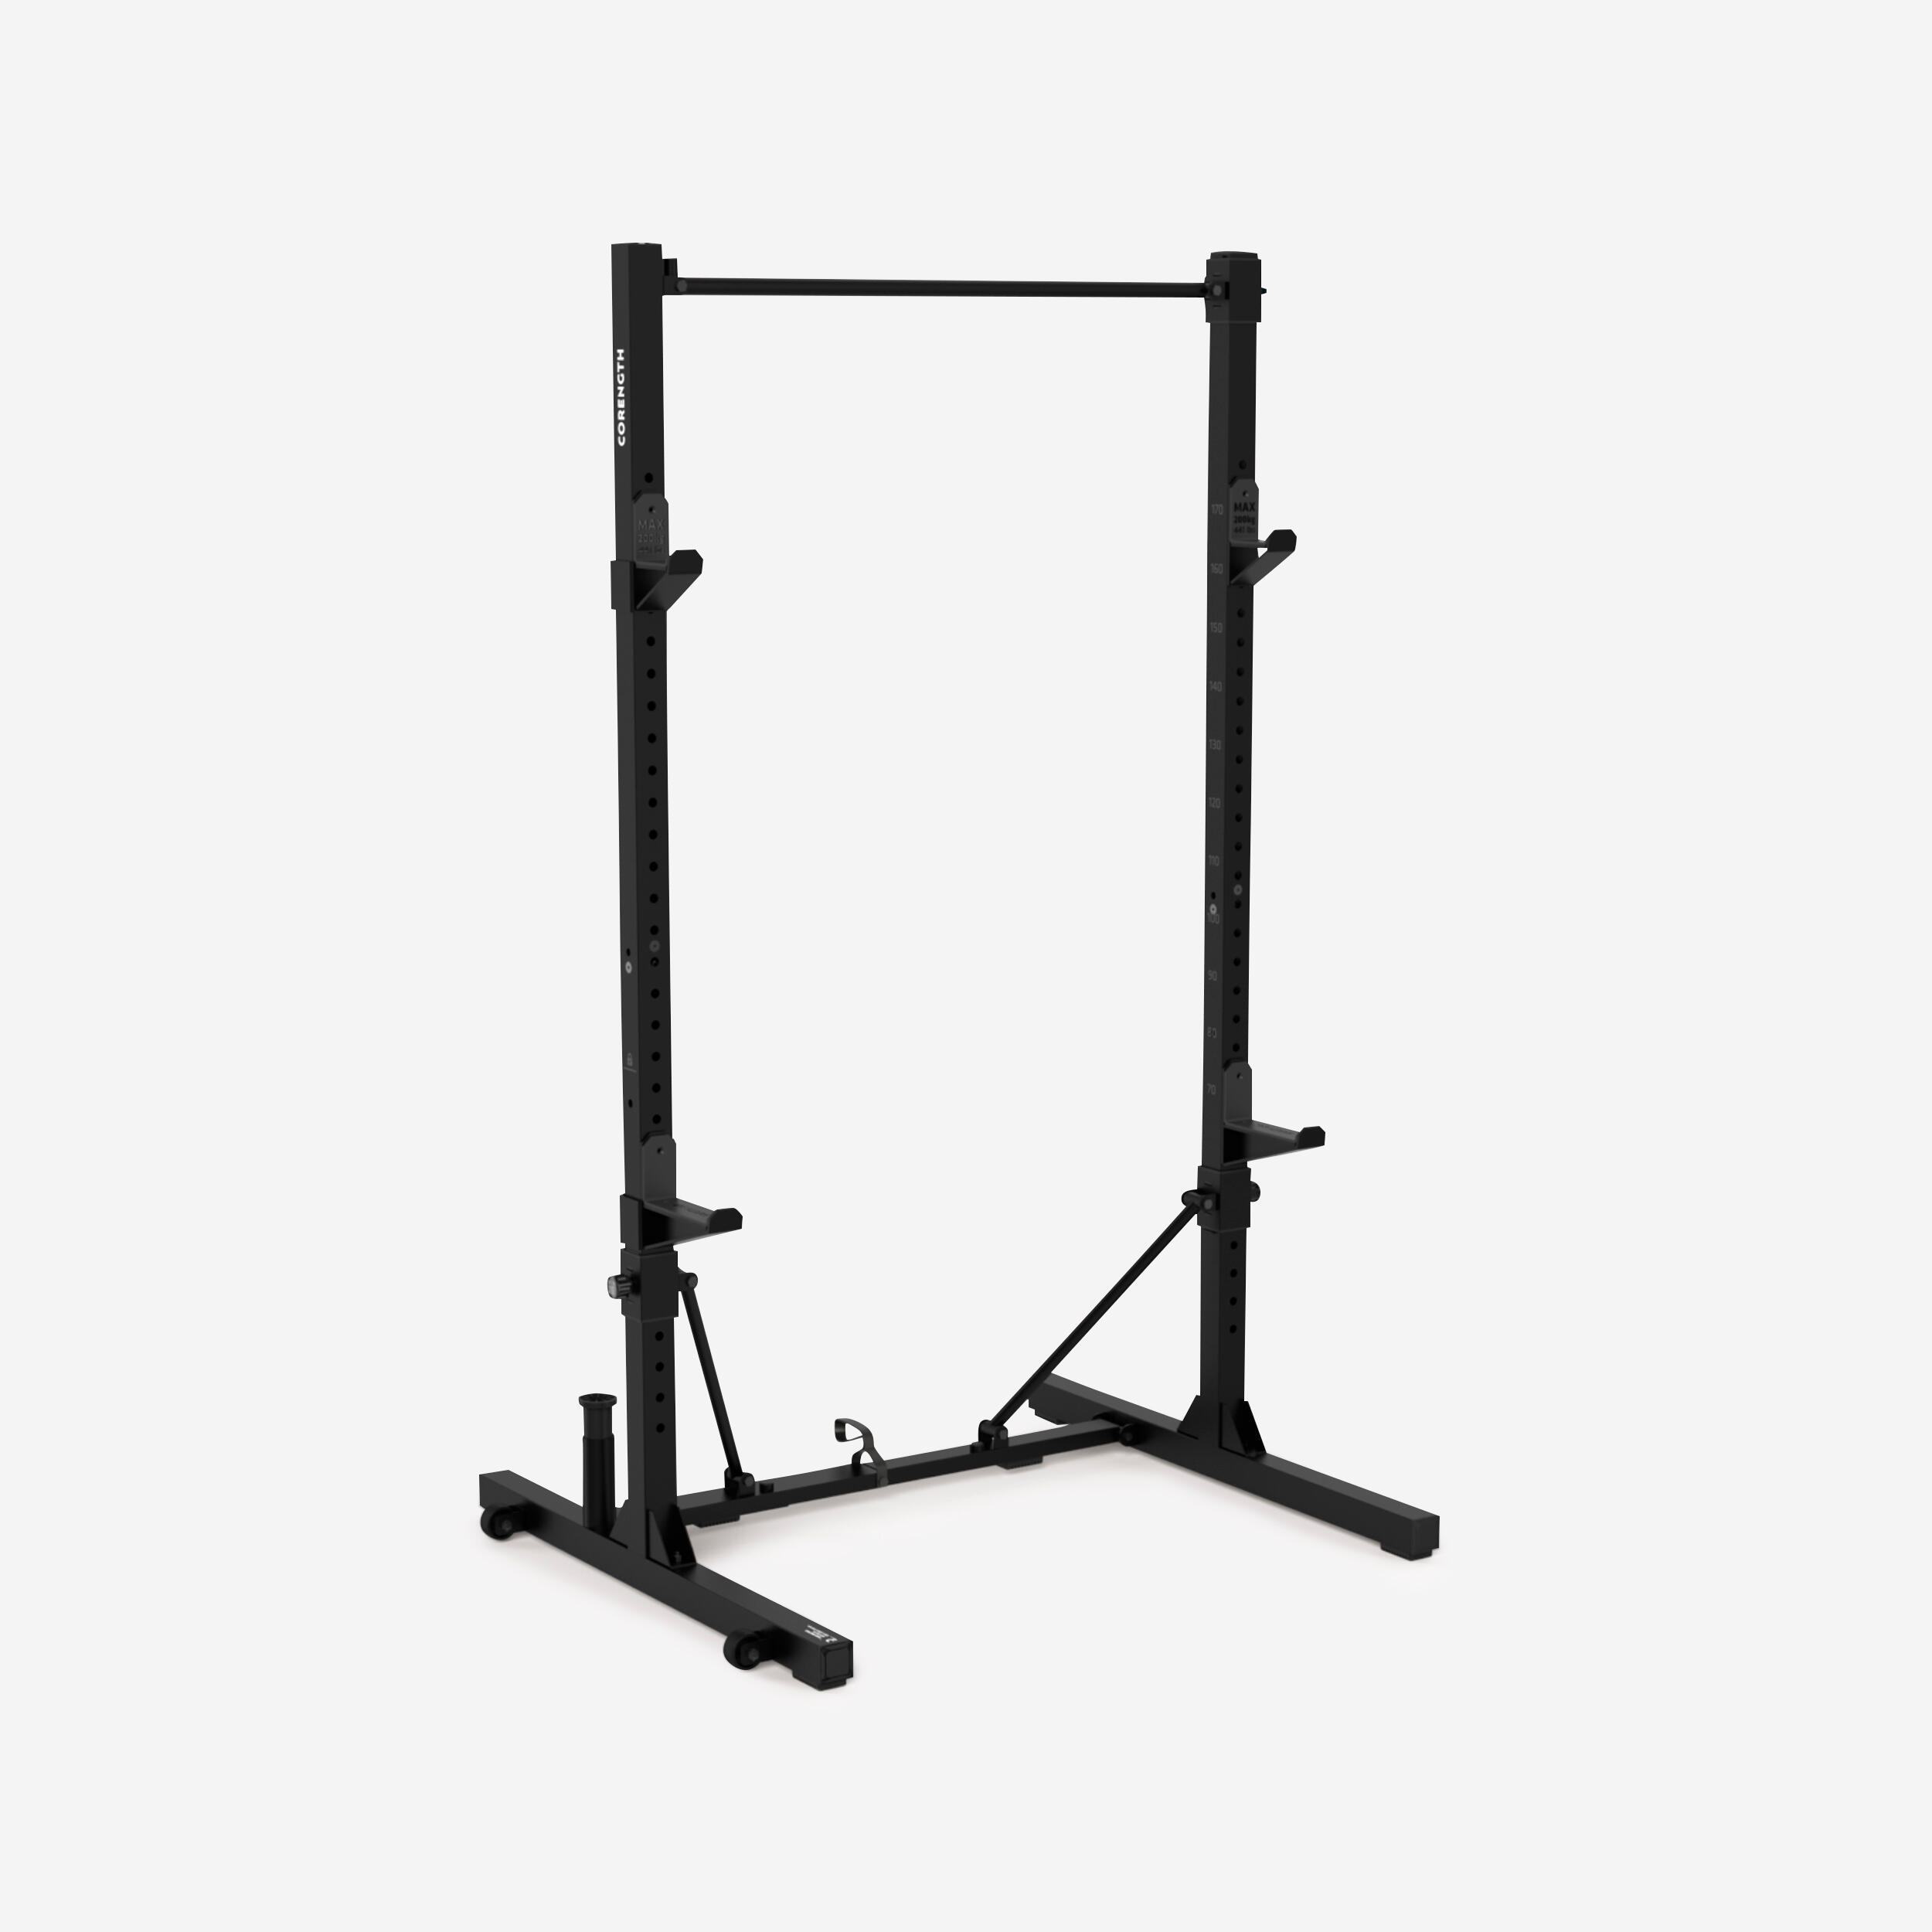 CORENGTH Fold-Down/Retractable Squat, Bench & Pull-Up Weight Training Rack 500